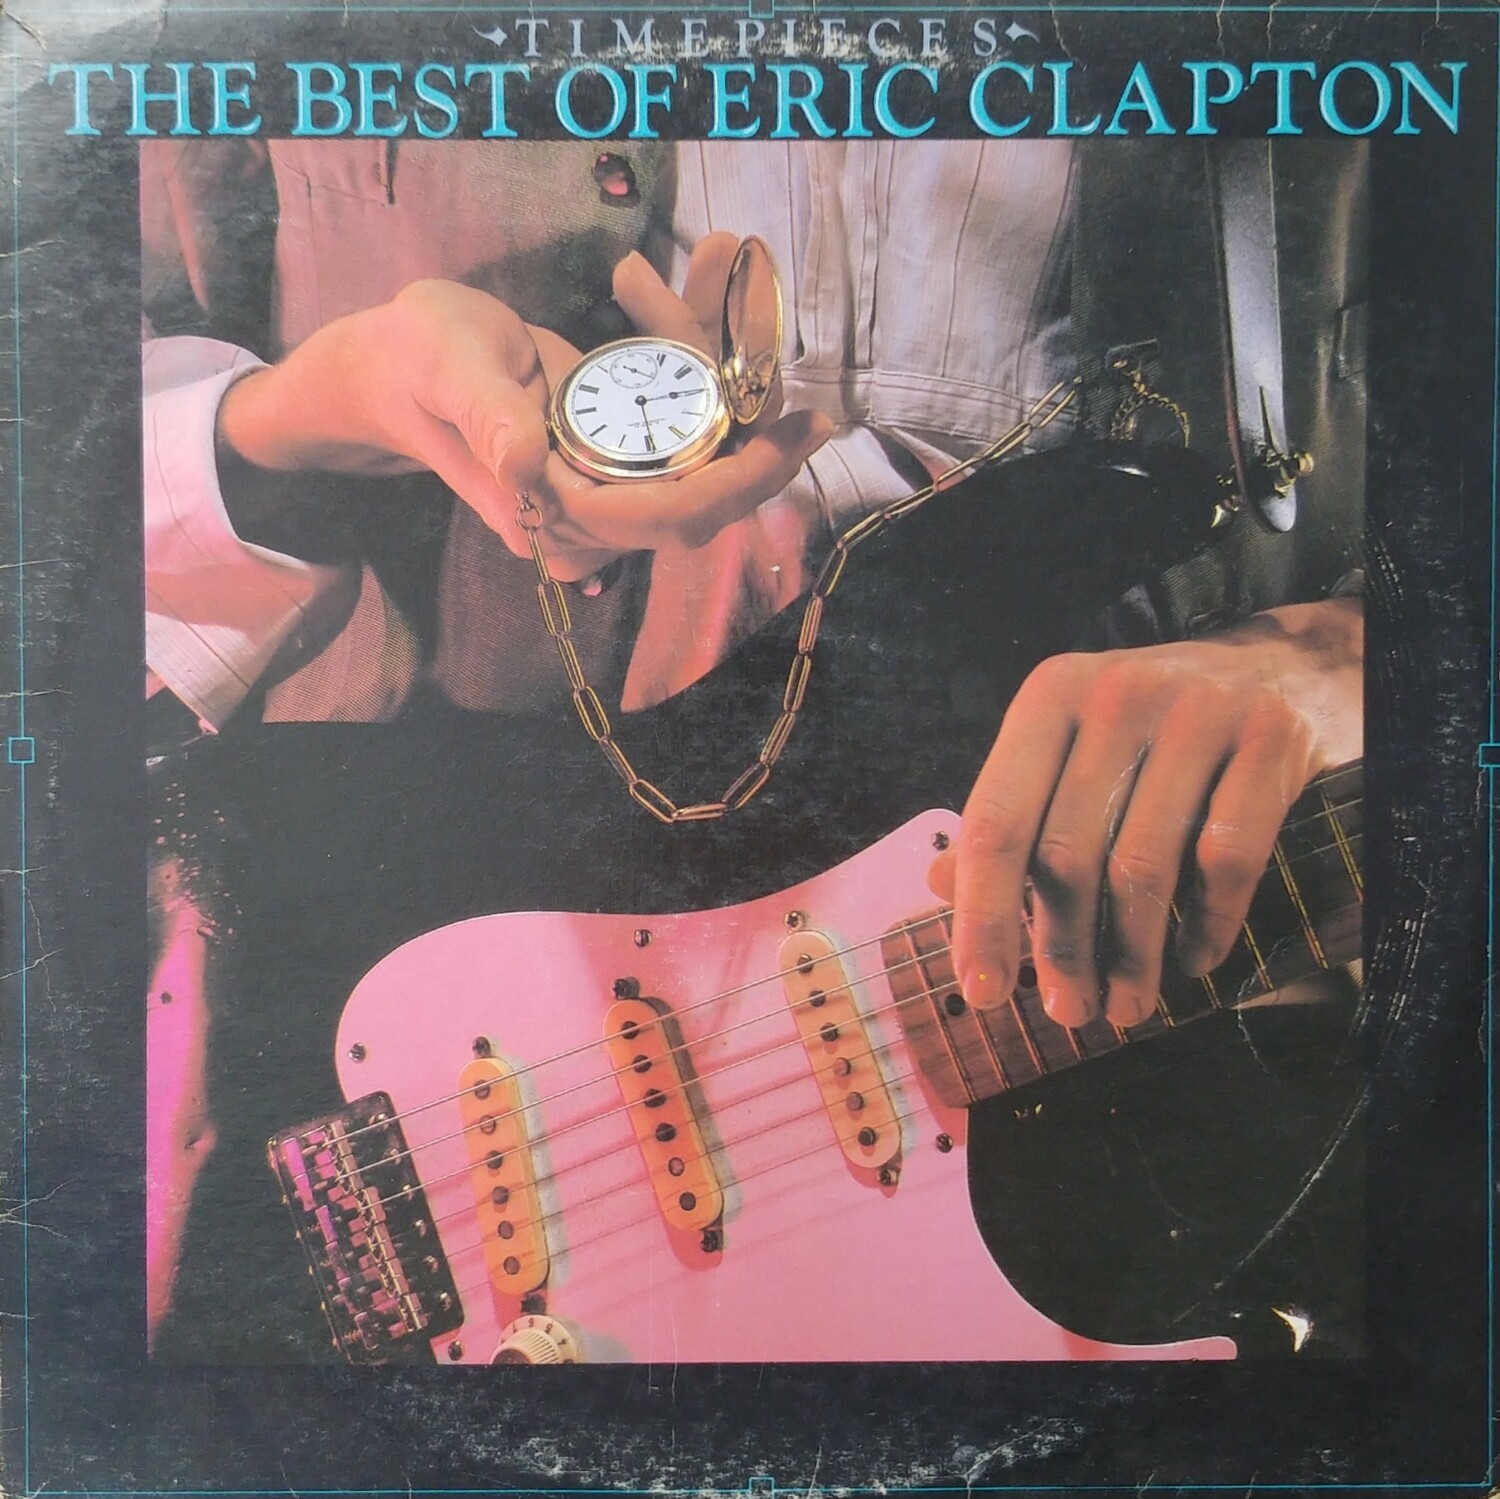 Eric Clapton - Time Pieces The Best of